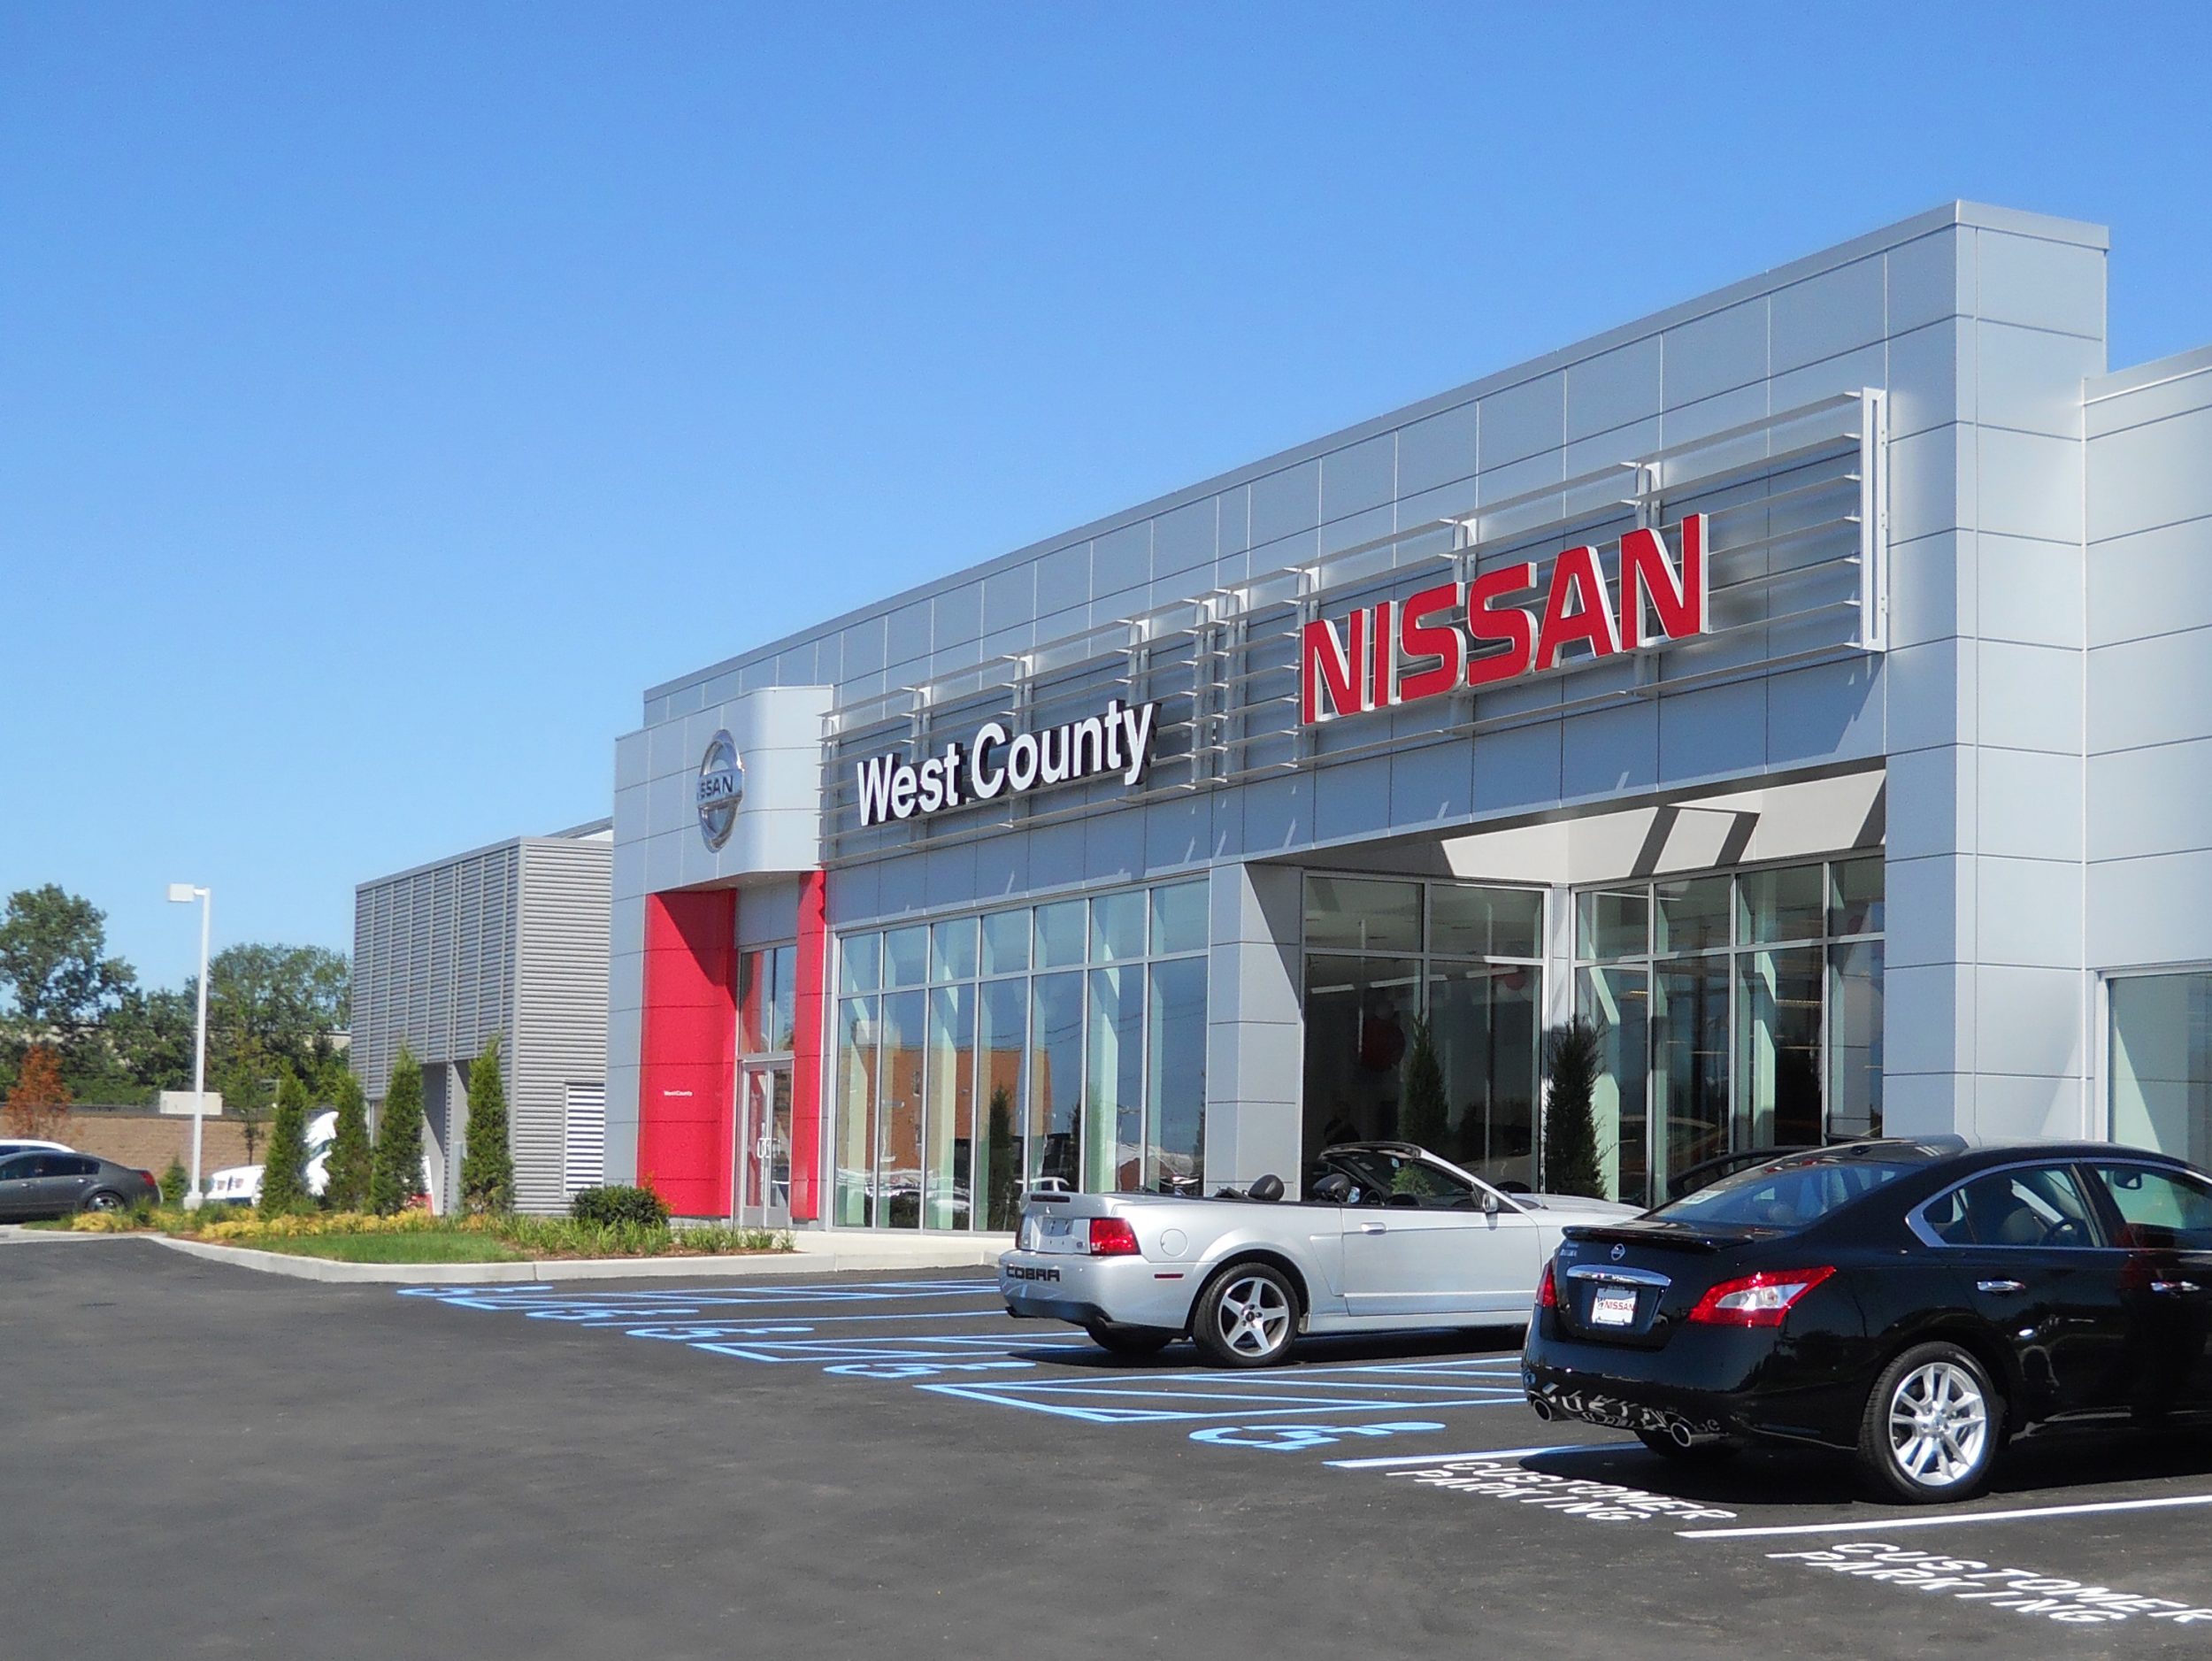 West County Nissan | TR,i Architects St. Louis